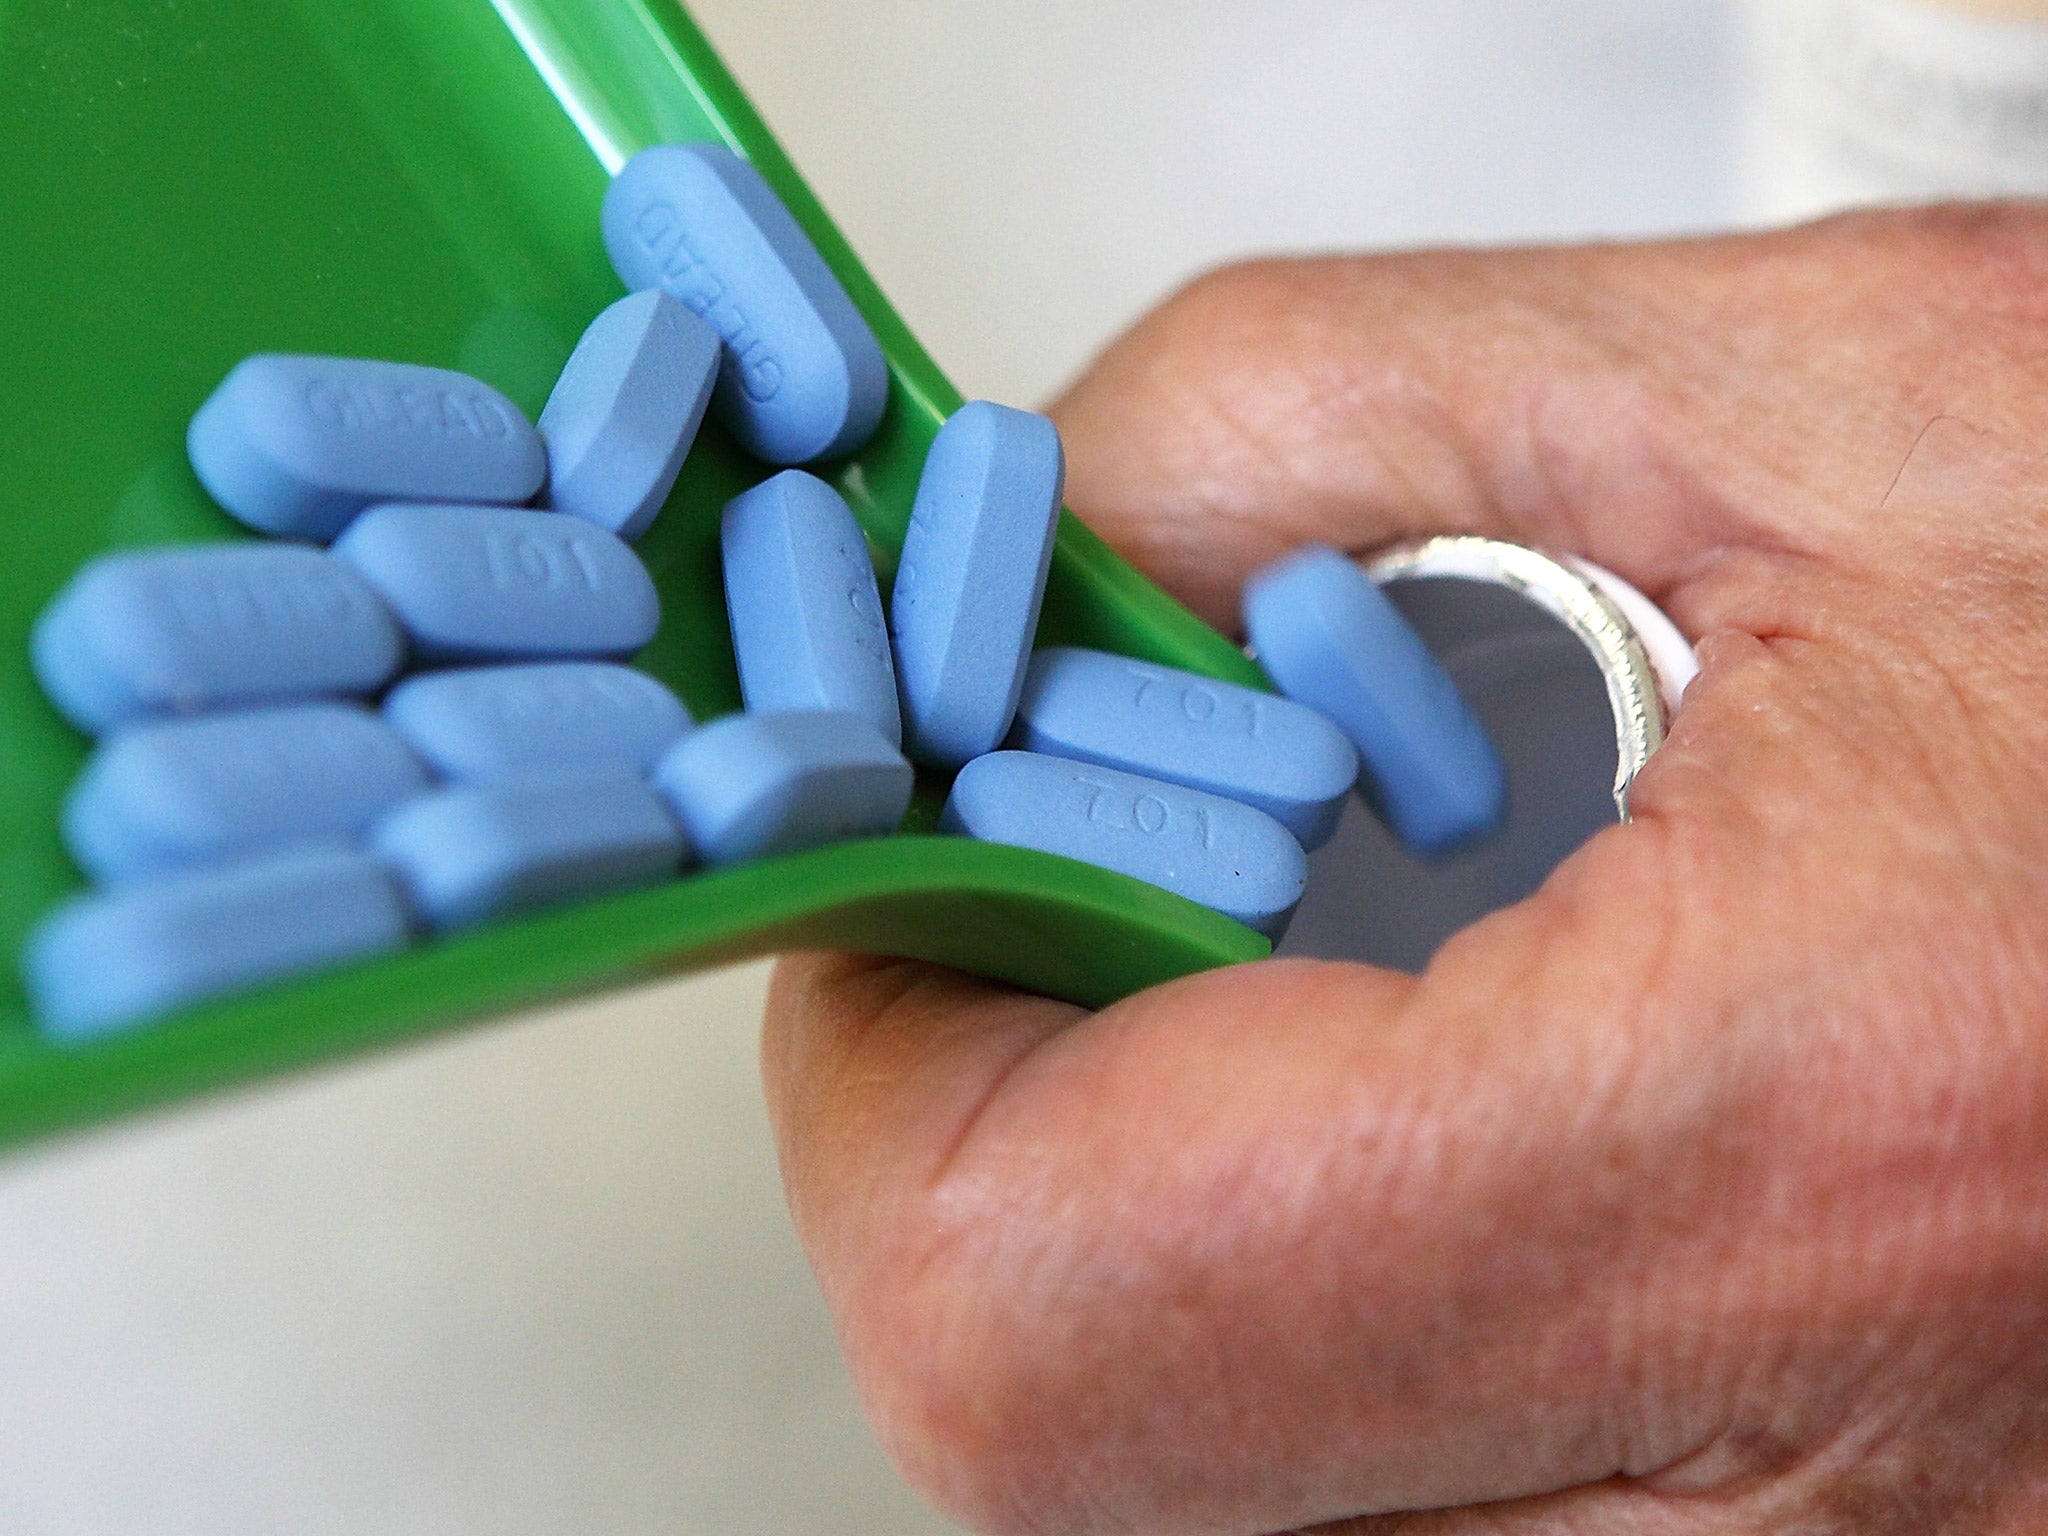 Prep – a daily pill which can be taken by those at high risk of HIV infection to prevent them contracting the virus – has been shown in trials to prevent around 17 in every 20 infections